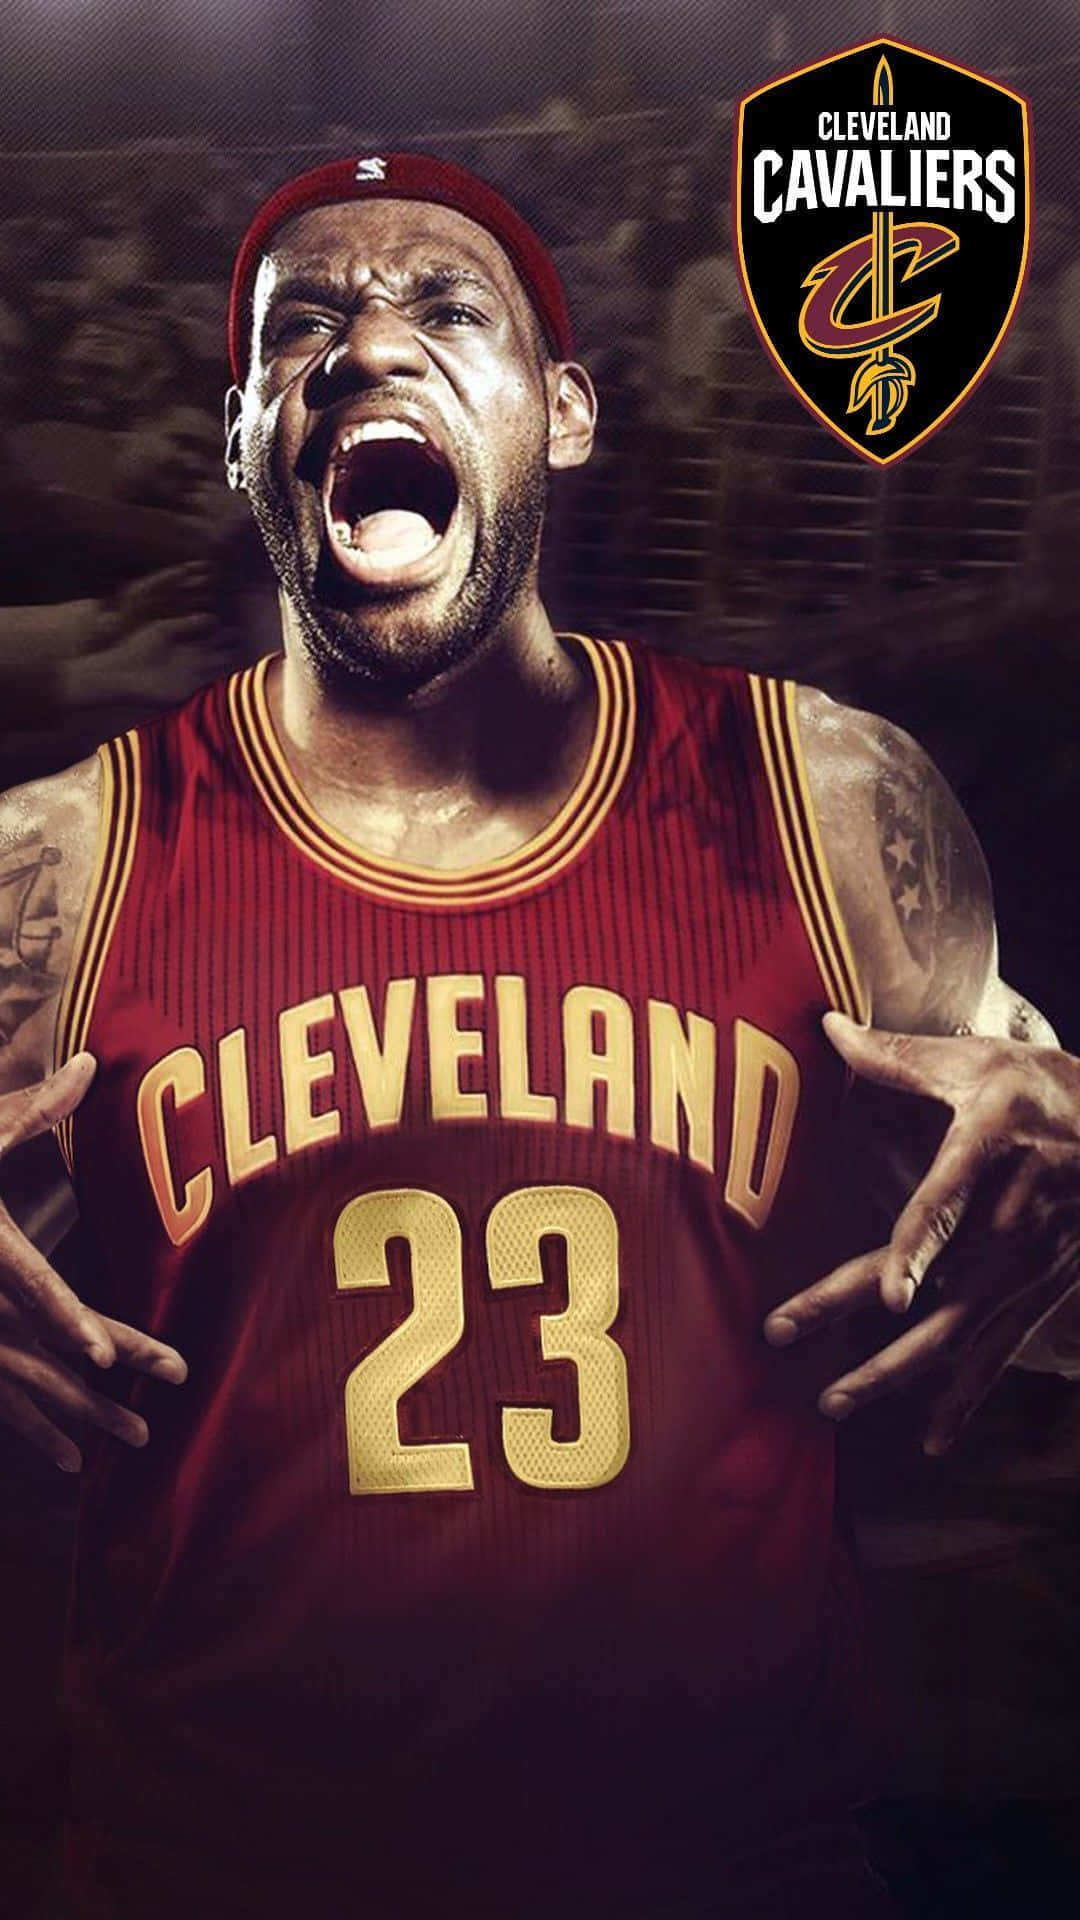 Lebron James with his iPhone Wallpaper